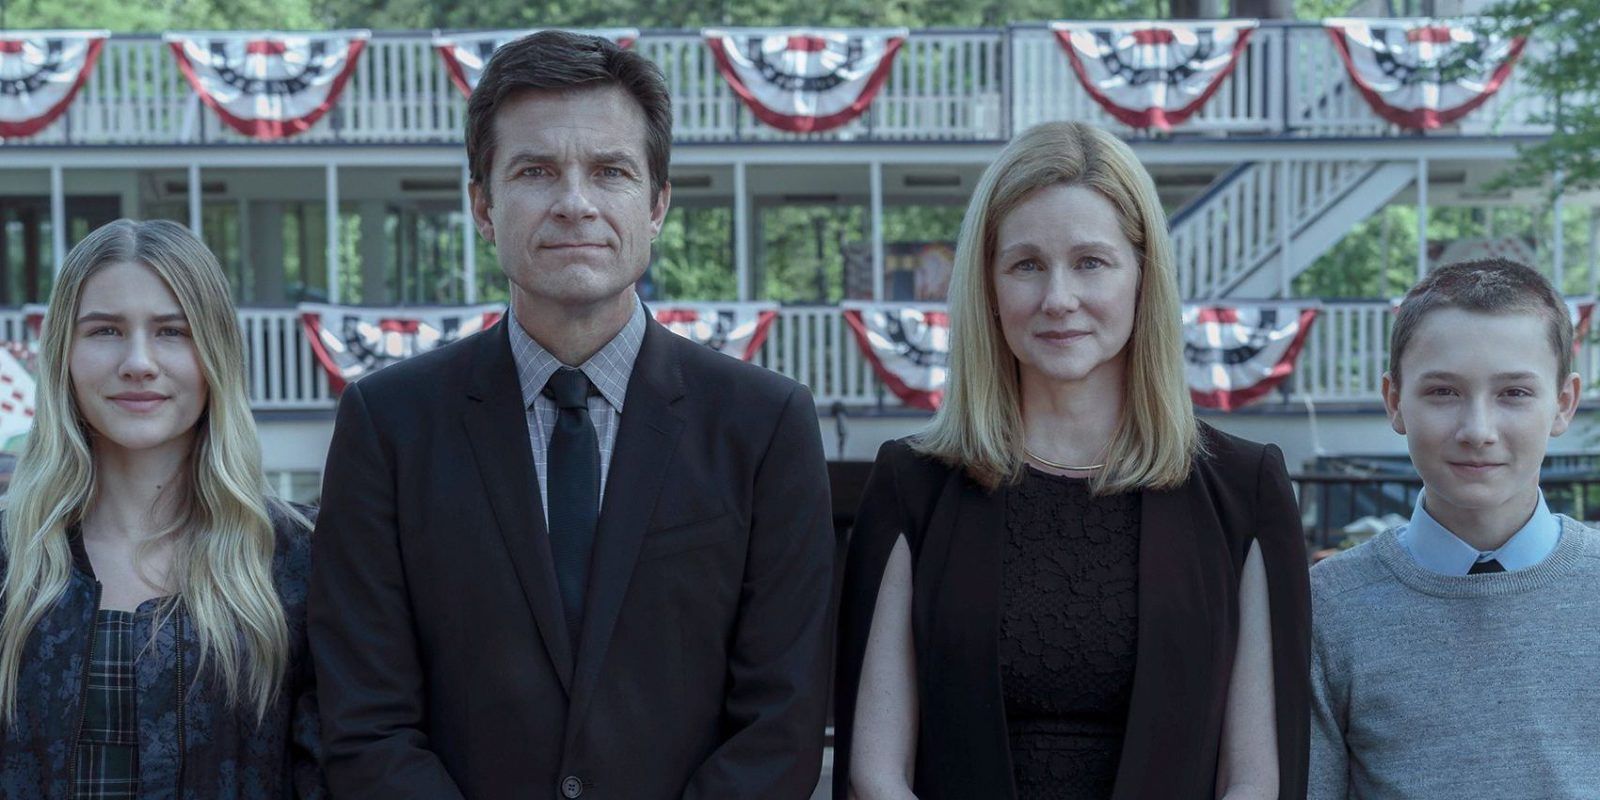 Why Wendy's Brother Ben From Ozark Season 3 Looks So Familiar